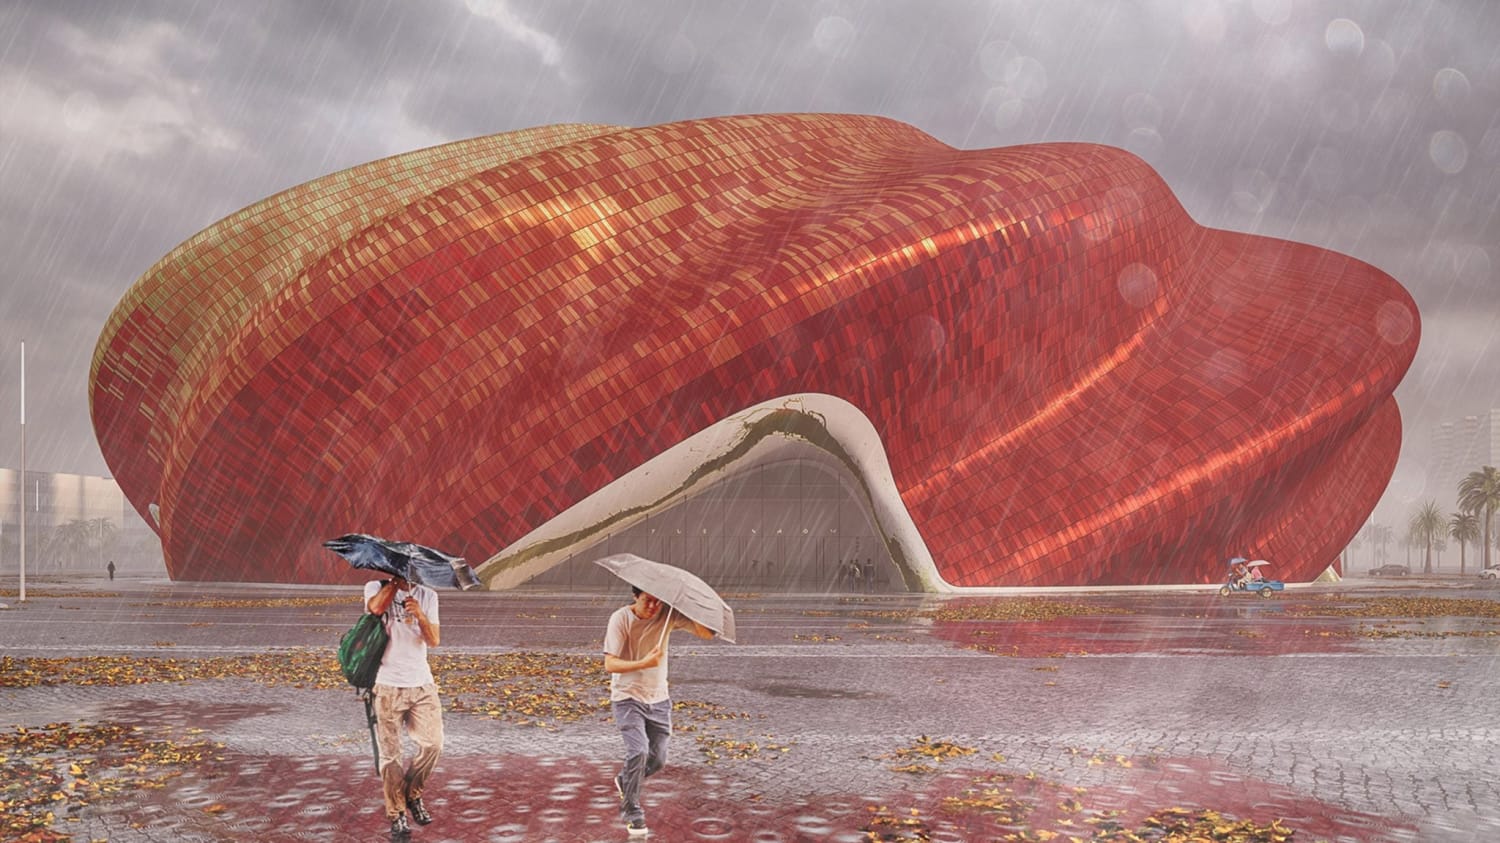 Sunac Guangzhou Grand Theatre, by Steven Chilton Architects (London). The design is inspired by traditional silk embroidery and the physicality of silk cloth, through a series of gently twisting folds that define the outer envelope.